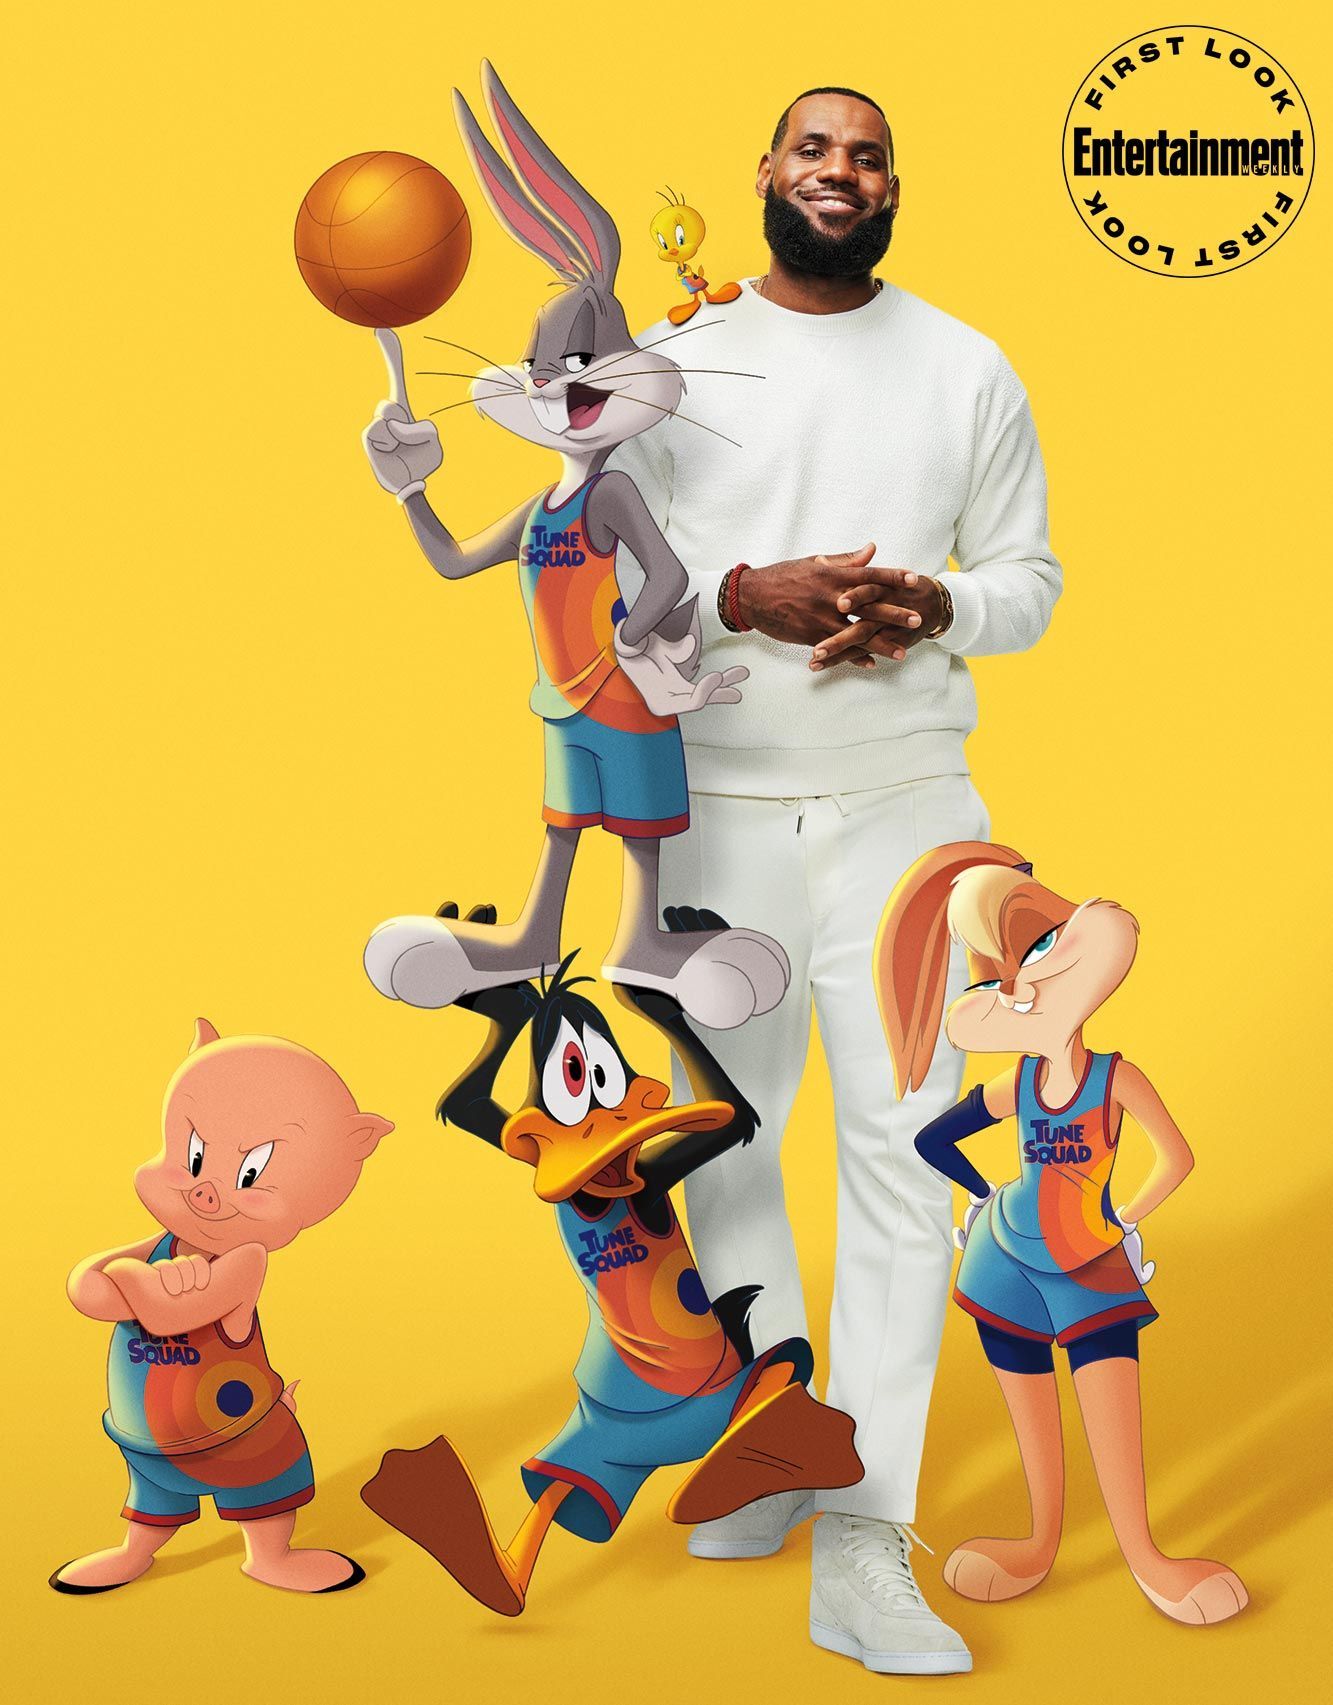 Game on! LeBron James balls out in 'Space Jam: A New Legacy' first look